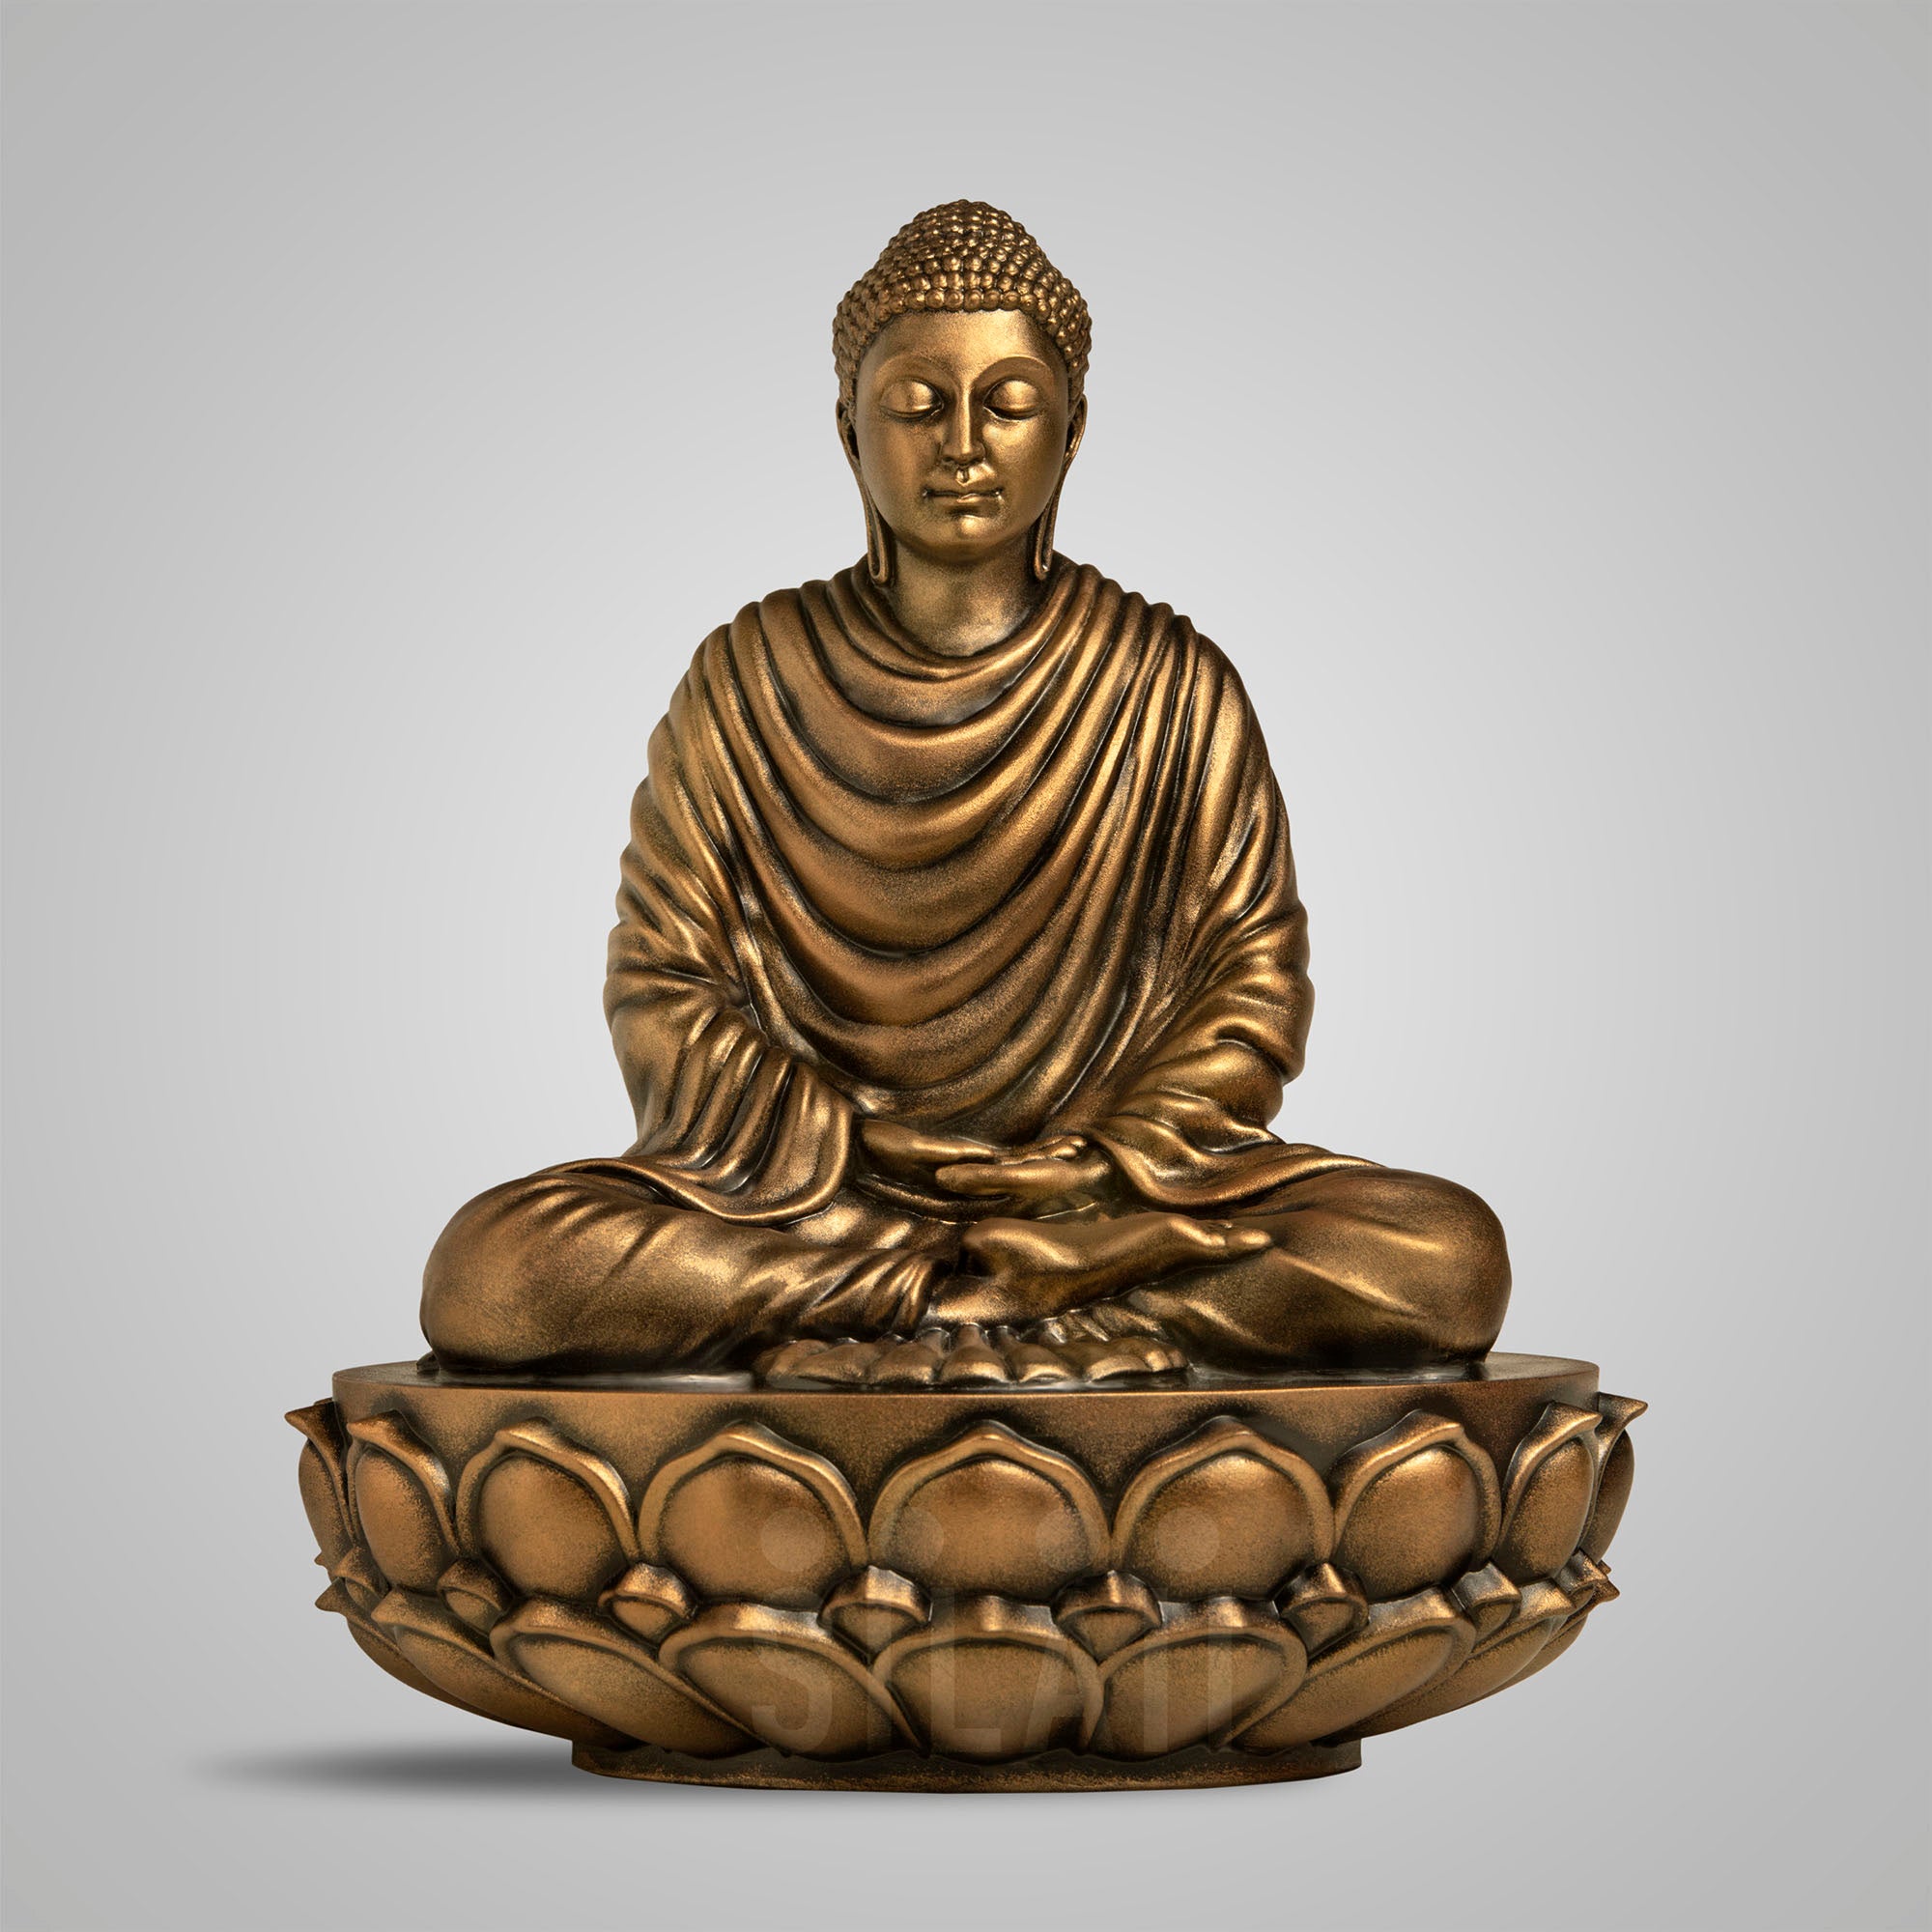 Gautama Buddha Sculpture and Statue for your Home Decor and Garden, Buy  Now